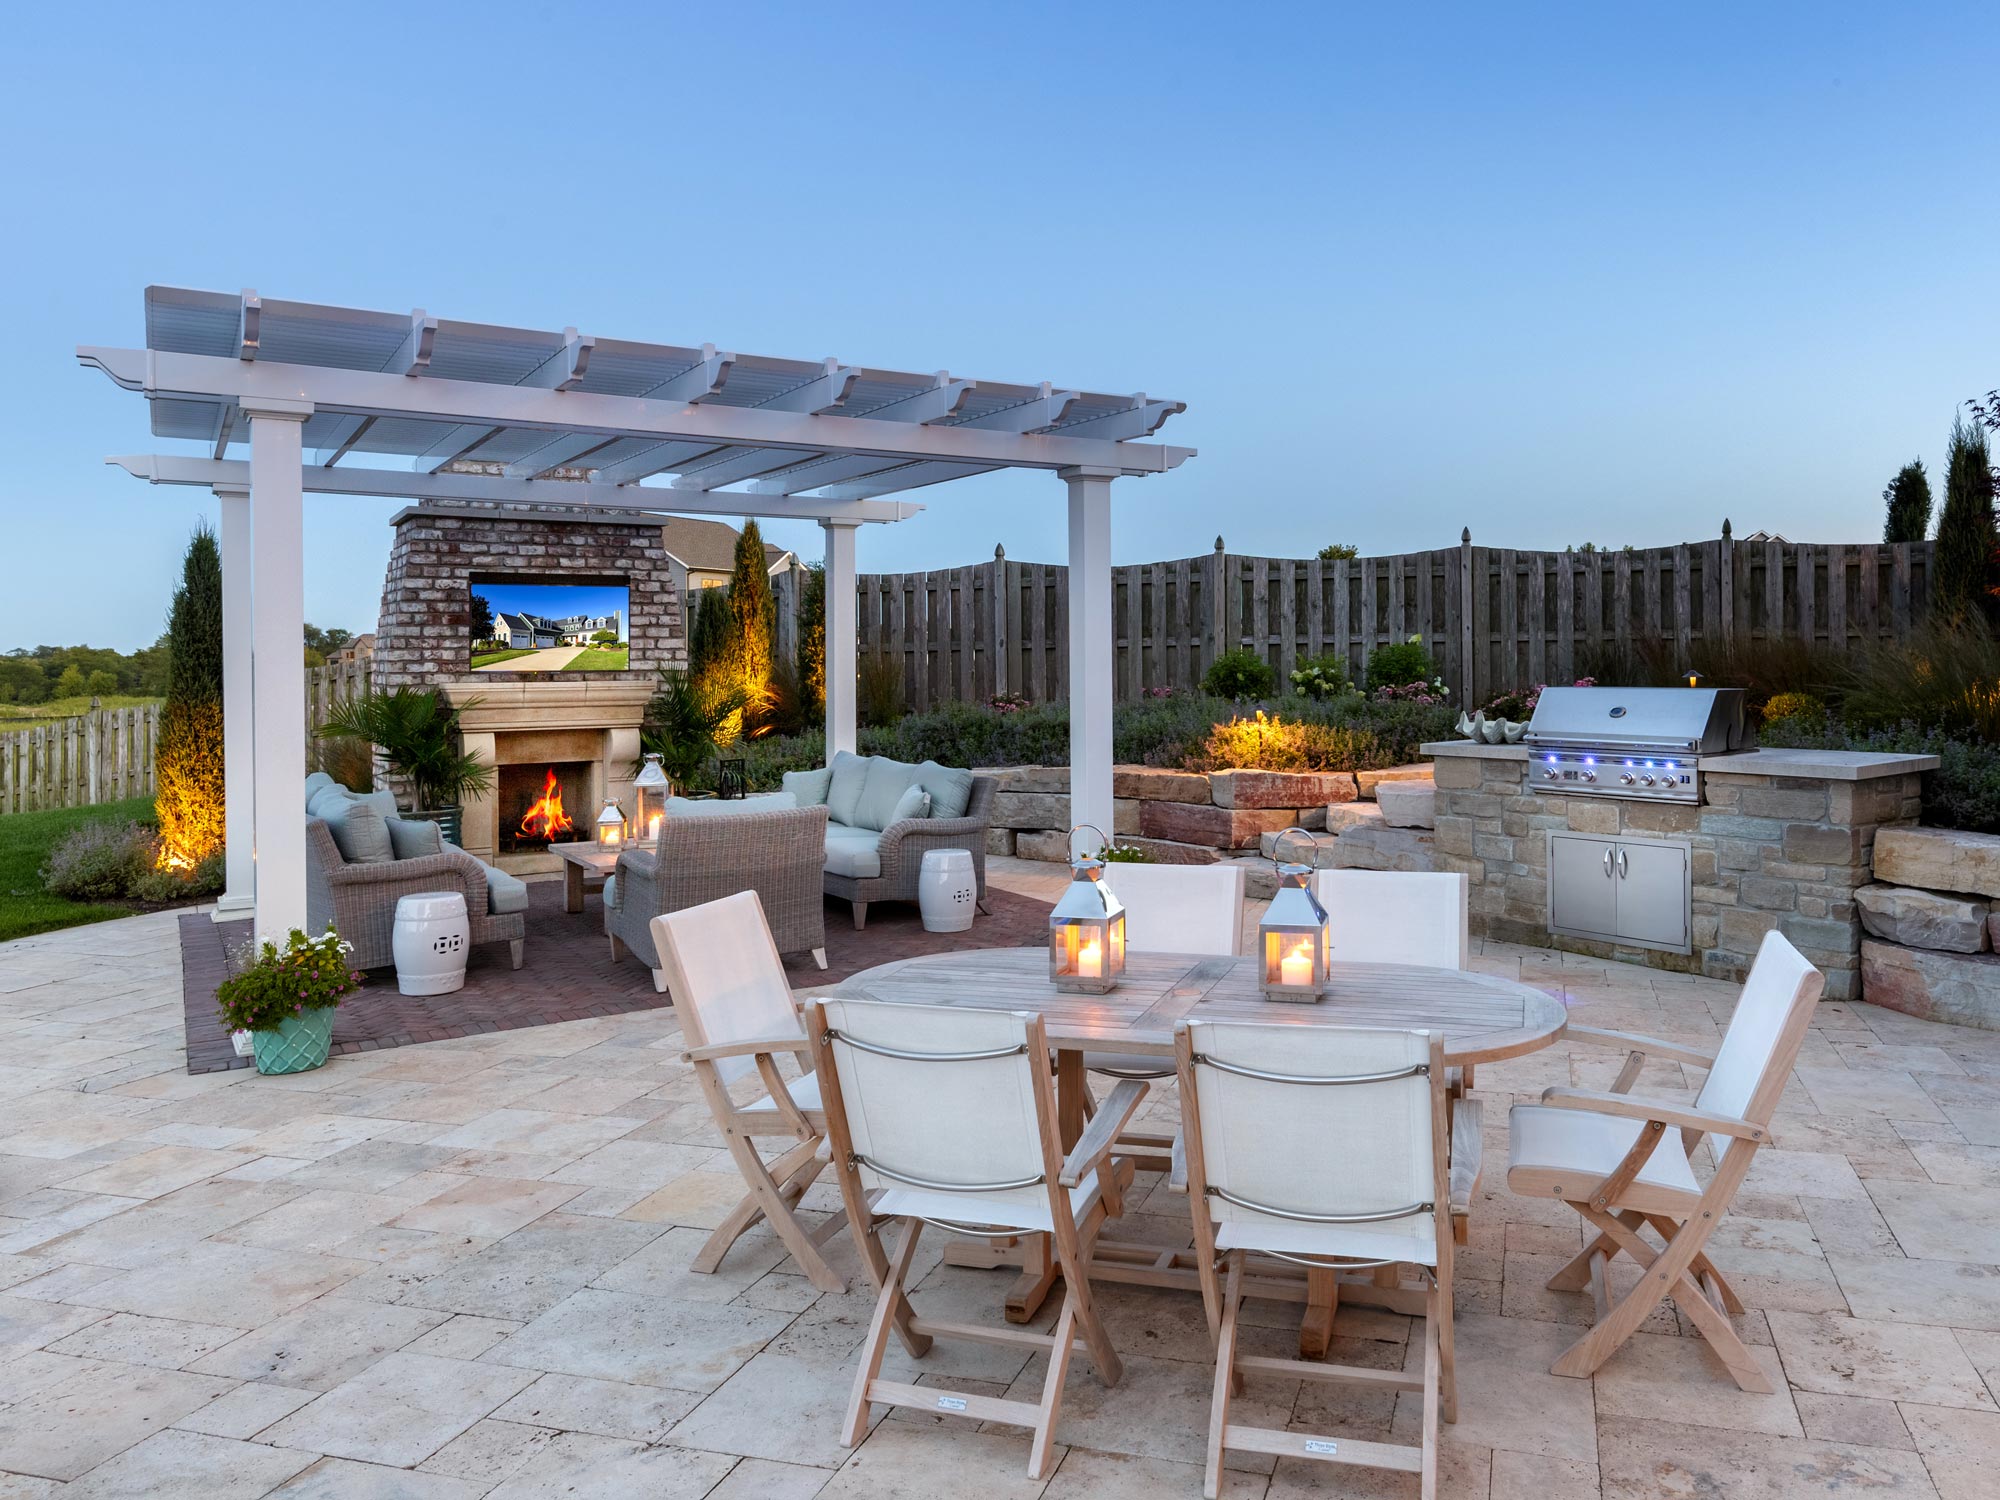 free standing pergola on a stone patio with outdoor fireplace, grill and dining area